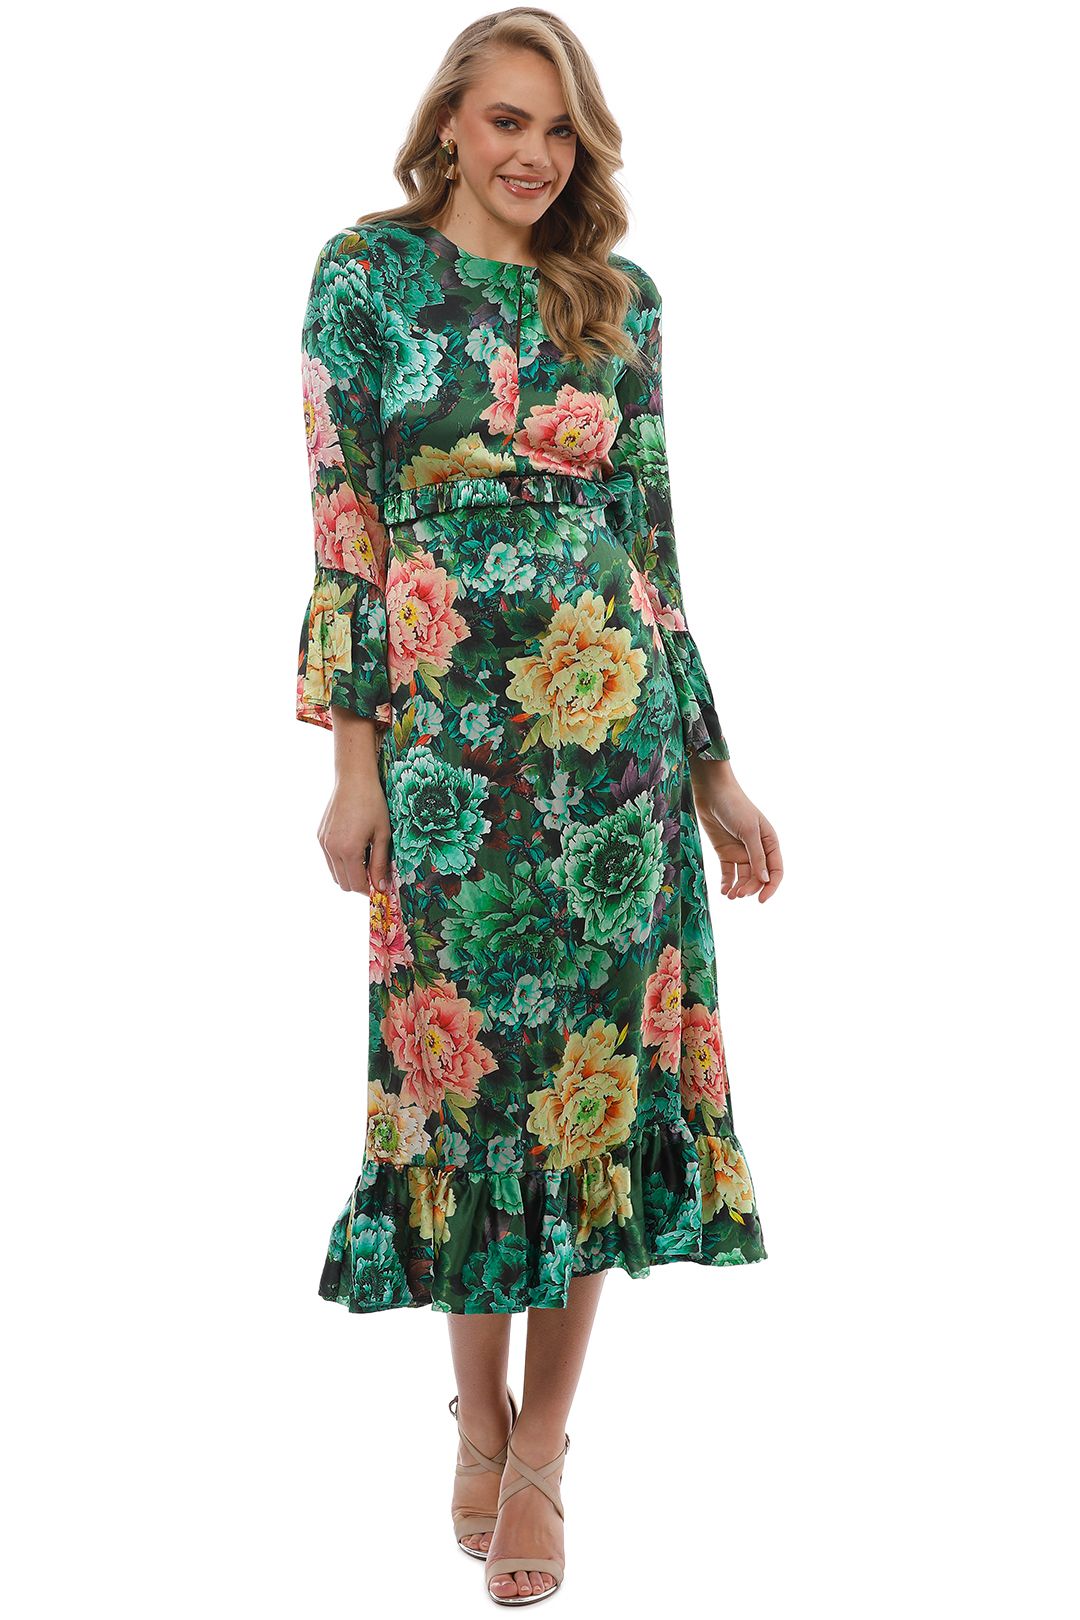 Trelise Cooper - Kill Them With Kindness Dress - Green Floral - Front